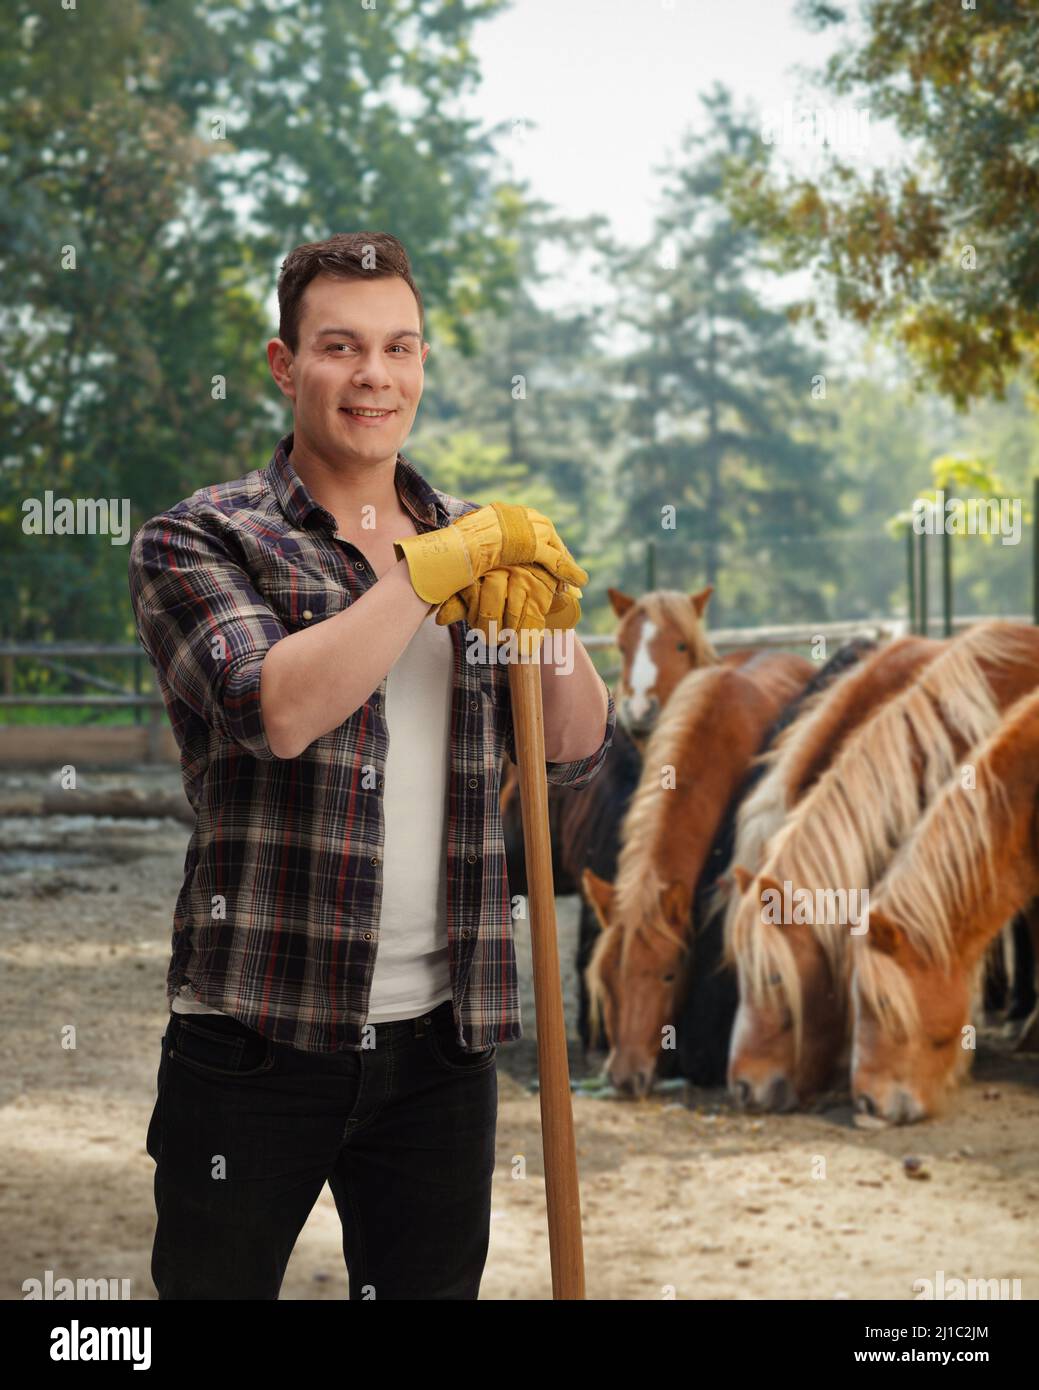 Stud farm worker posing with horses in the back Stock Photo